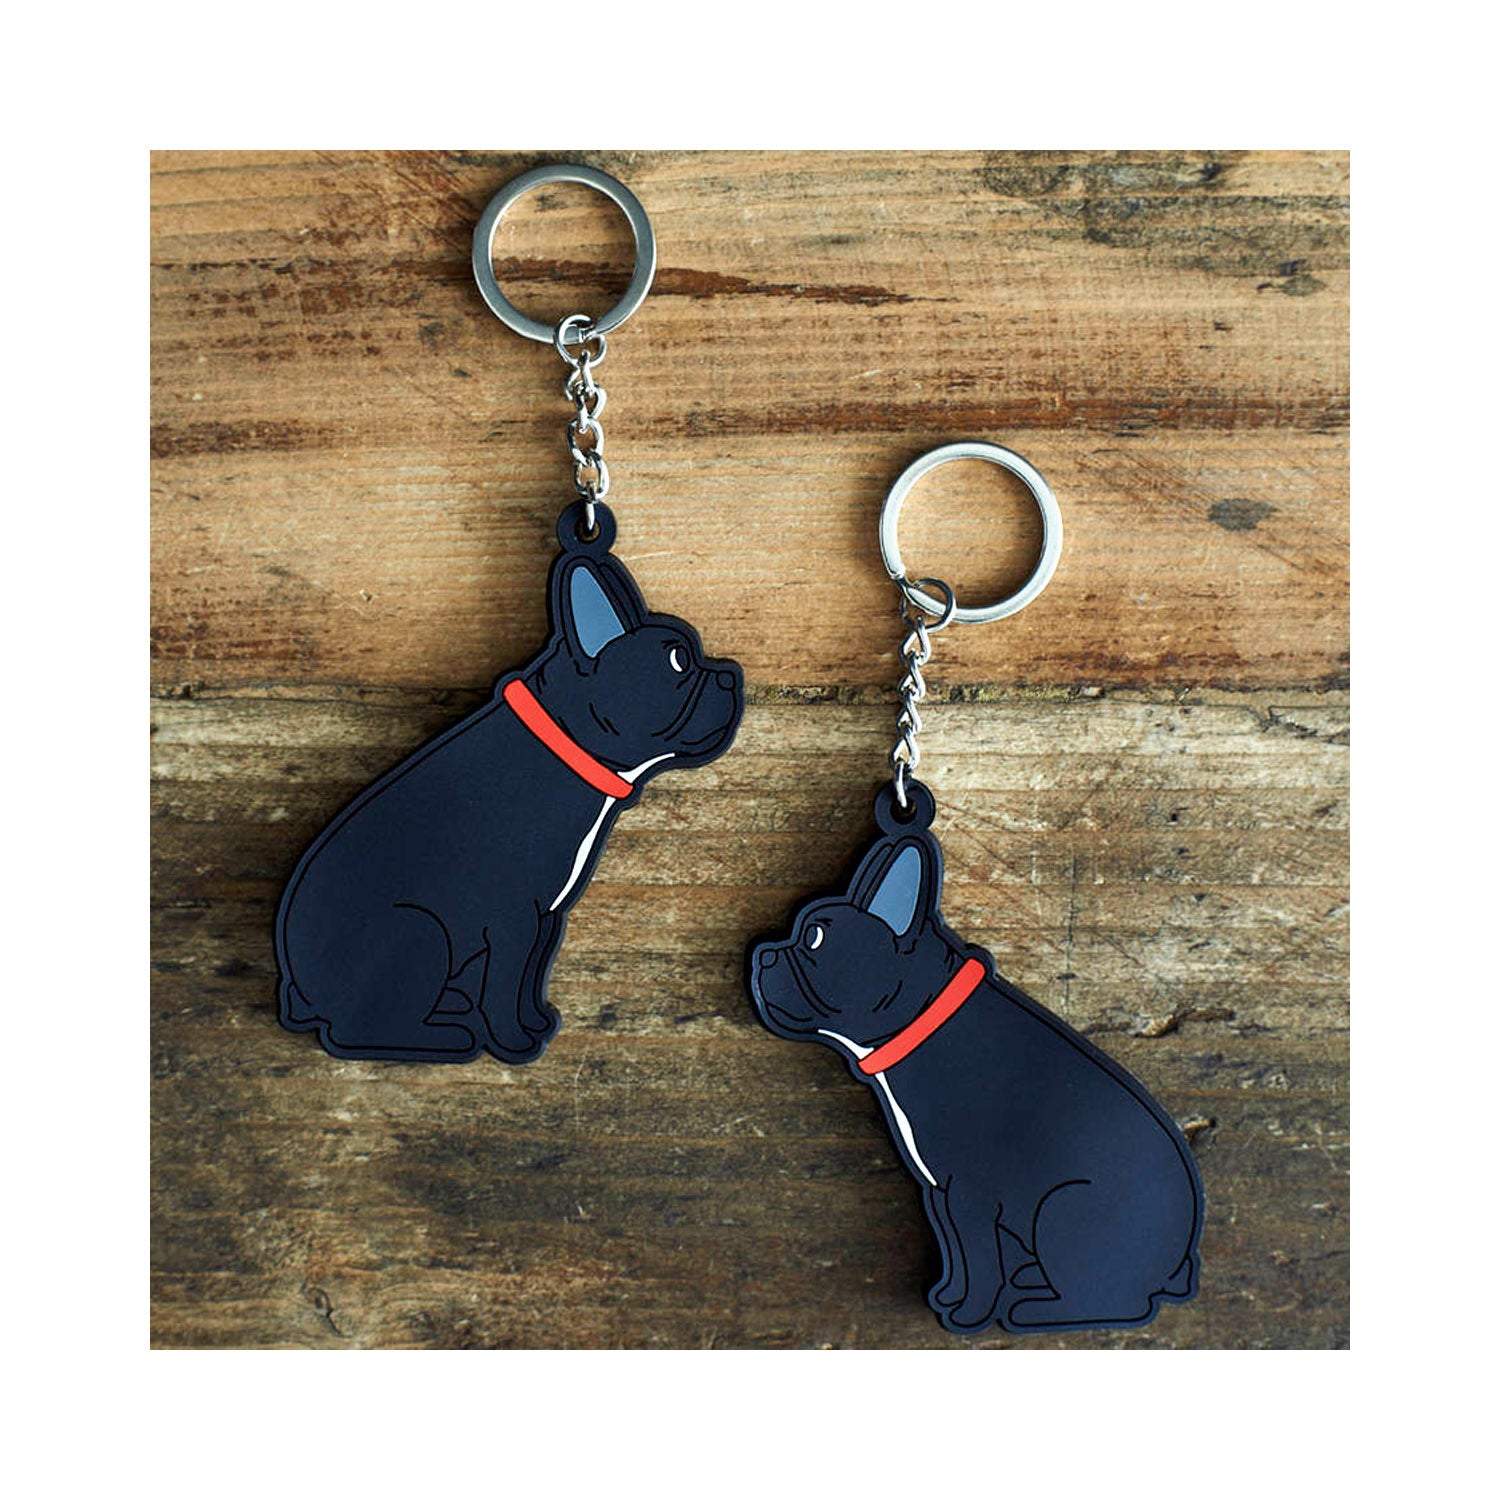 Dog Lover Gifts available at Dog Krazy Gifts - Freddie the French Bulldog Keyring - part of the Sweet William range available from Dog Krazy Gifts